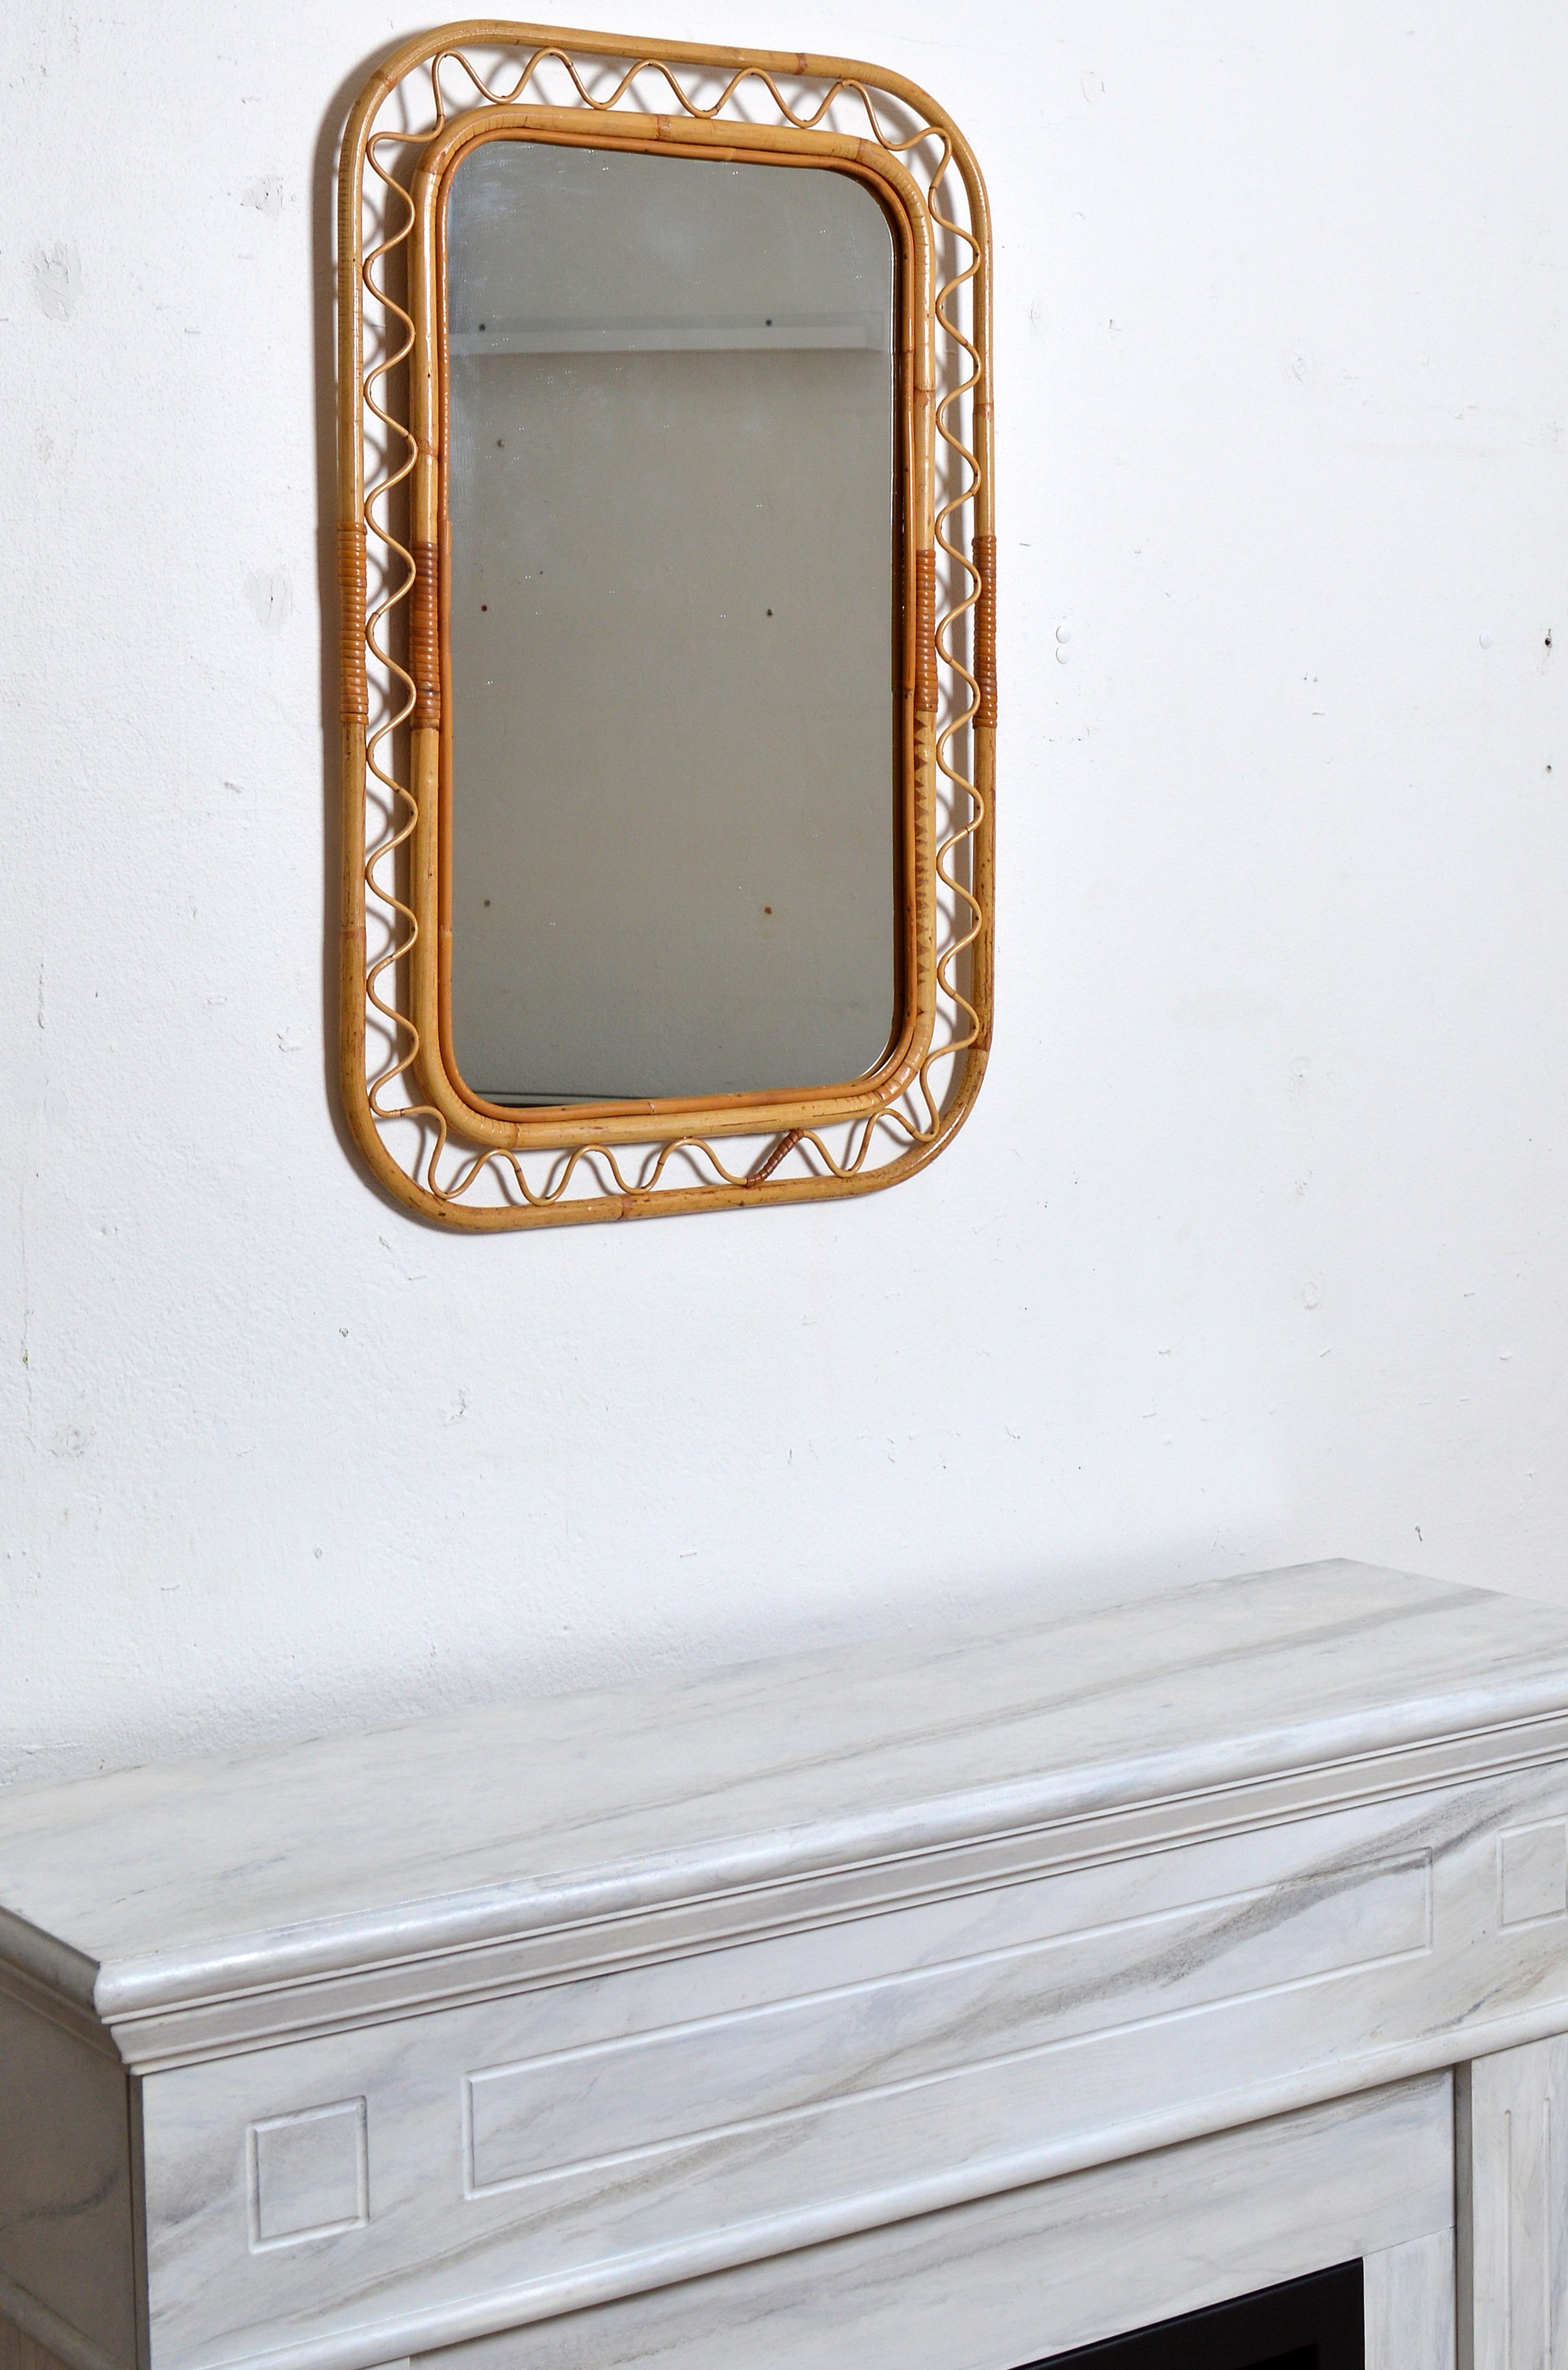 A Large wall mirror retailed by Svenskt Tenn the iconic Swedish firm founded by Estrid Ericson and creatively led by Josef Frank. In finely braided wicker / rattan / cane and bamboo. Excellent vintage condition. 

Other designers of the period